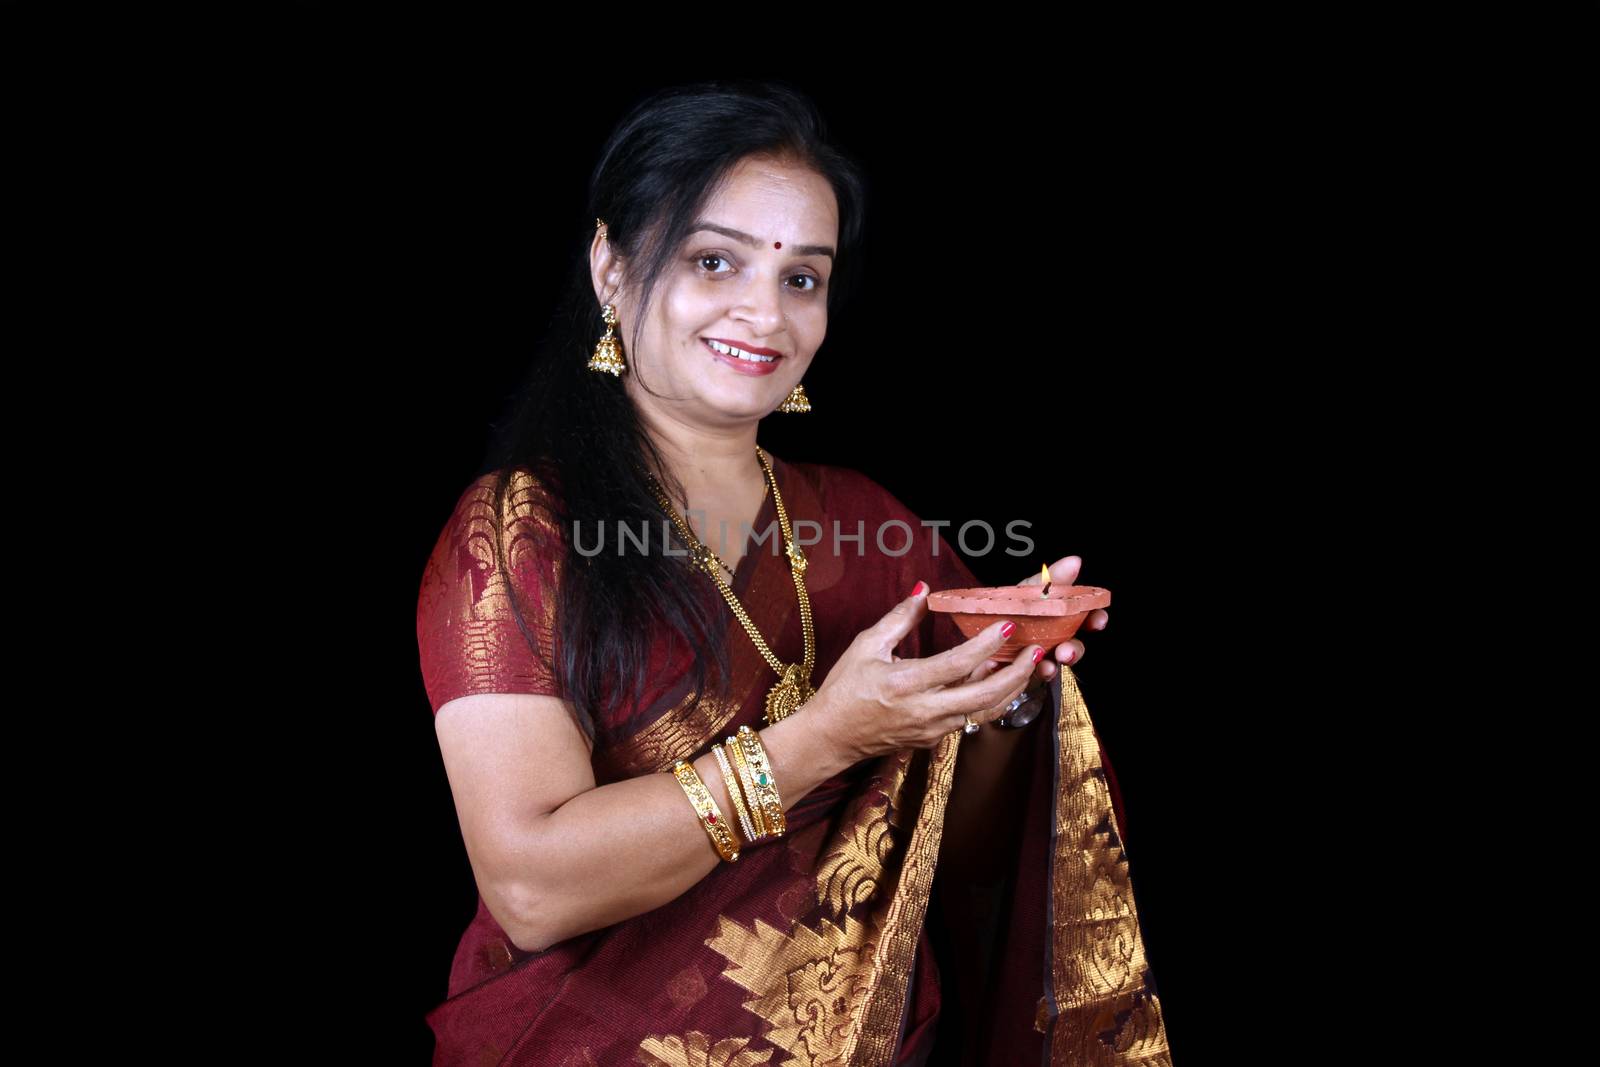 A middleaged Indian woman holding a traditional earthen lamp during Diwali festival in India, on black studio background.